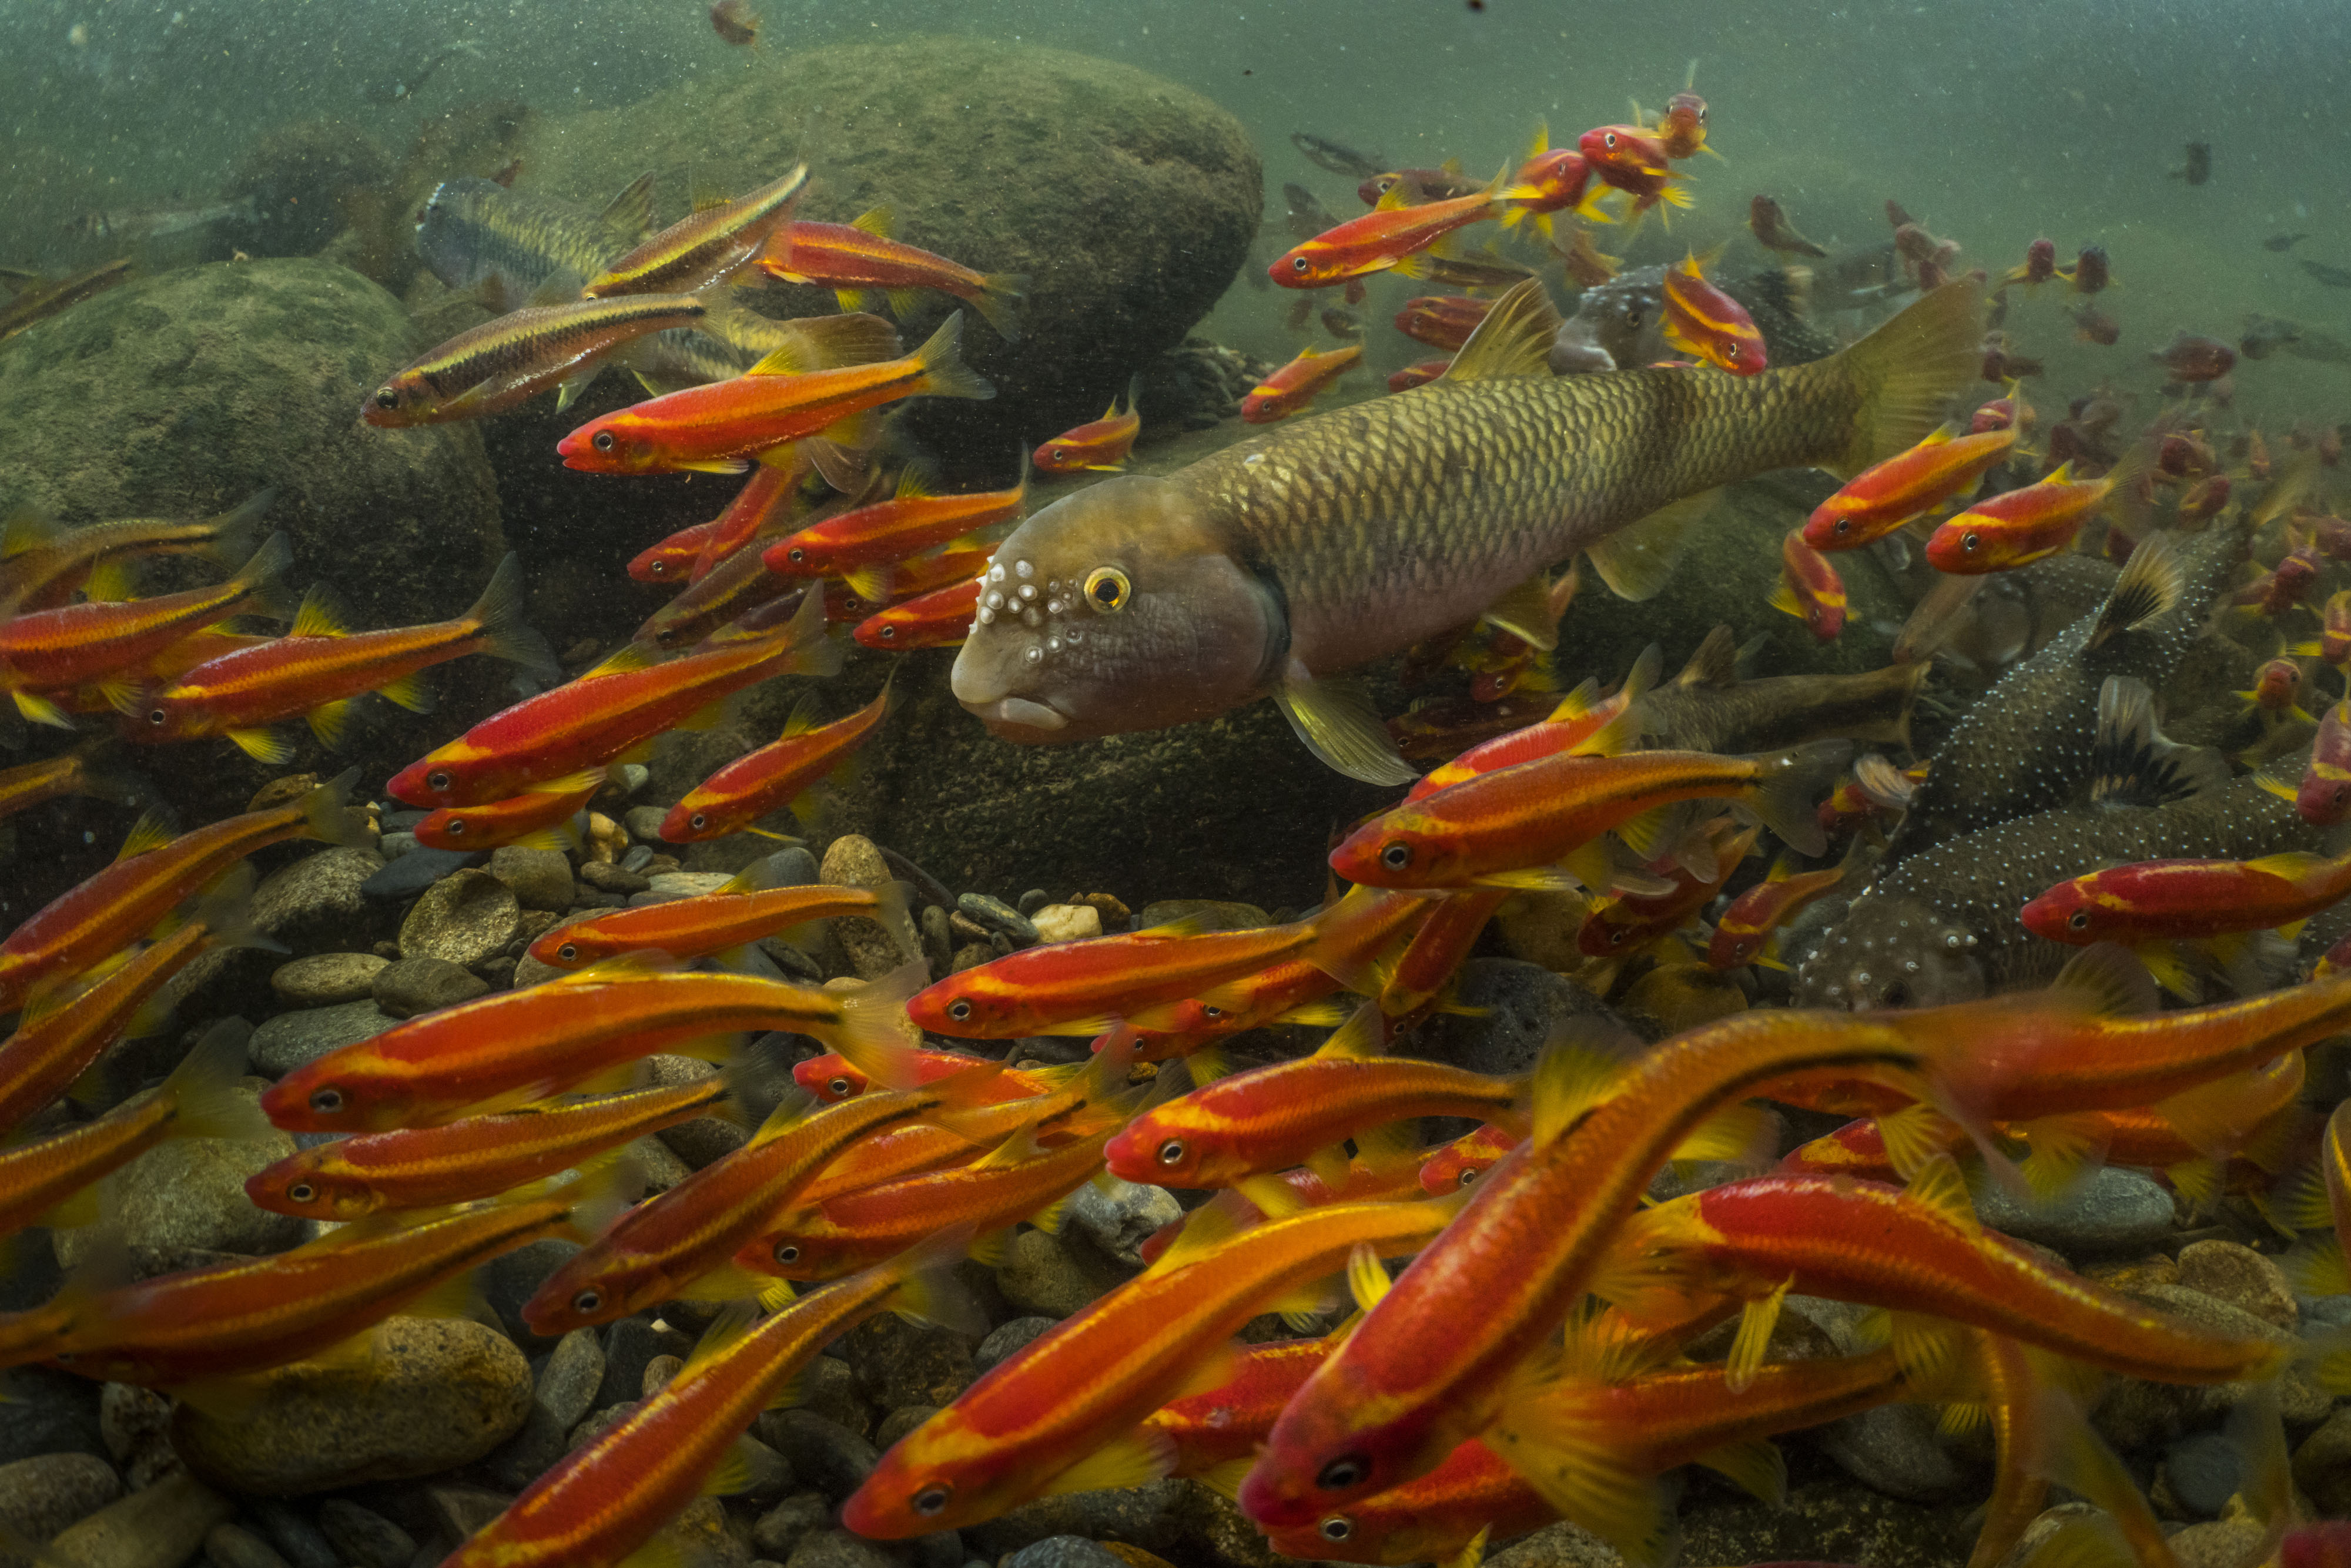 River Chub nest, Tennessee, USA ©Freshwaters Illustrated